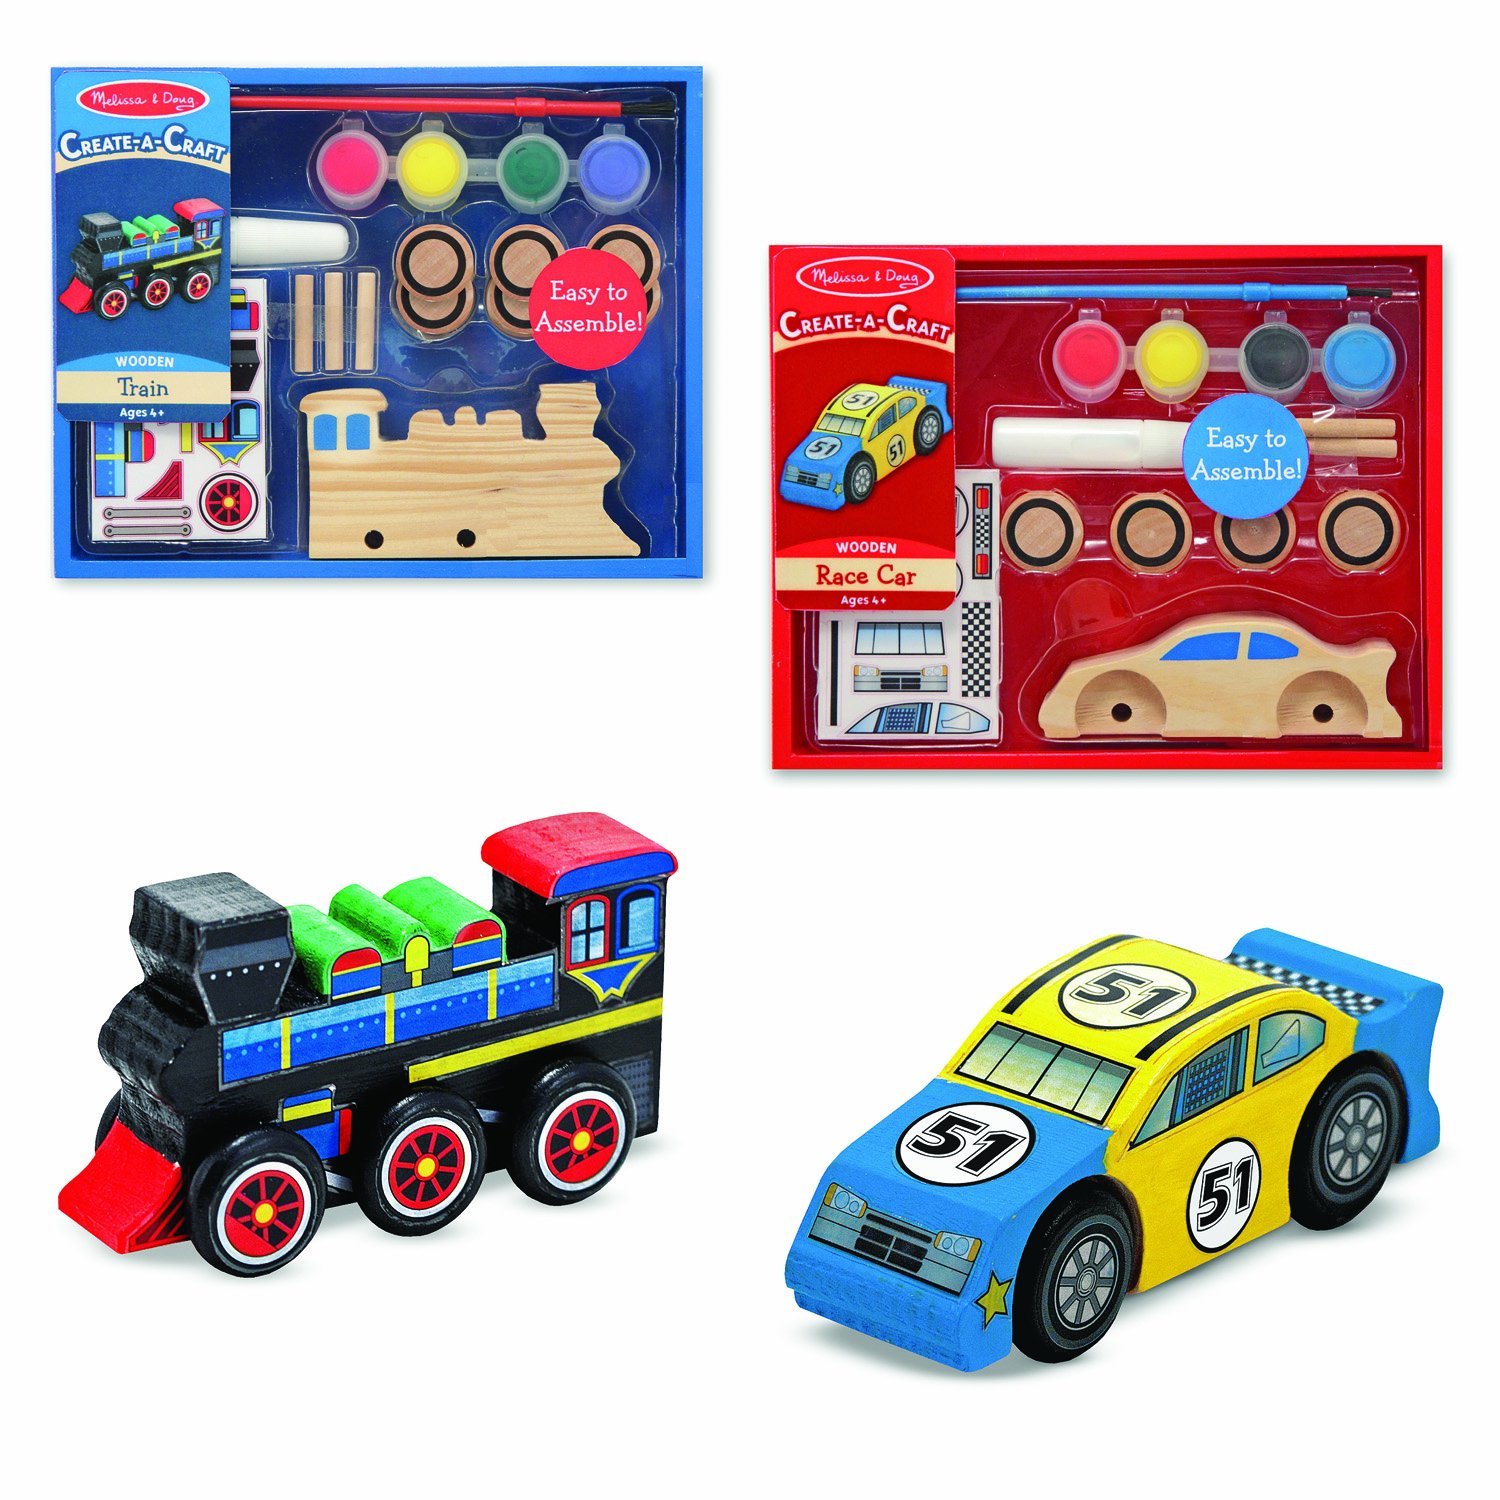 Melissa & Doug Decorate Your Own Toy 2 Pack Only $8